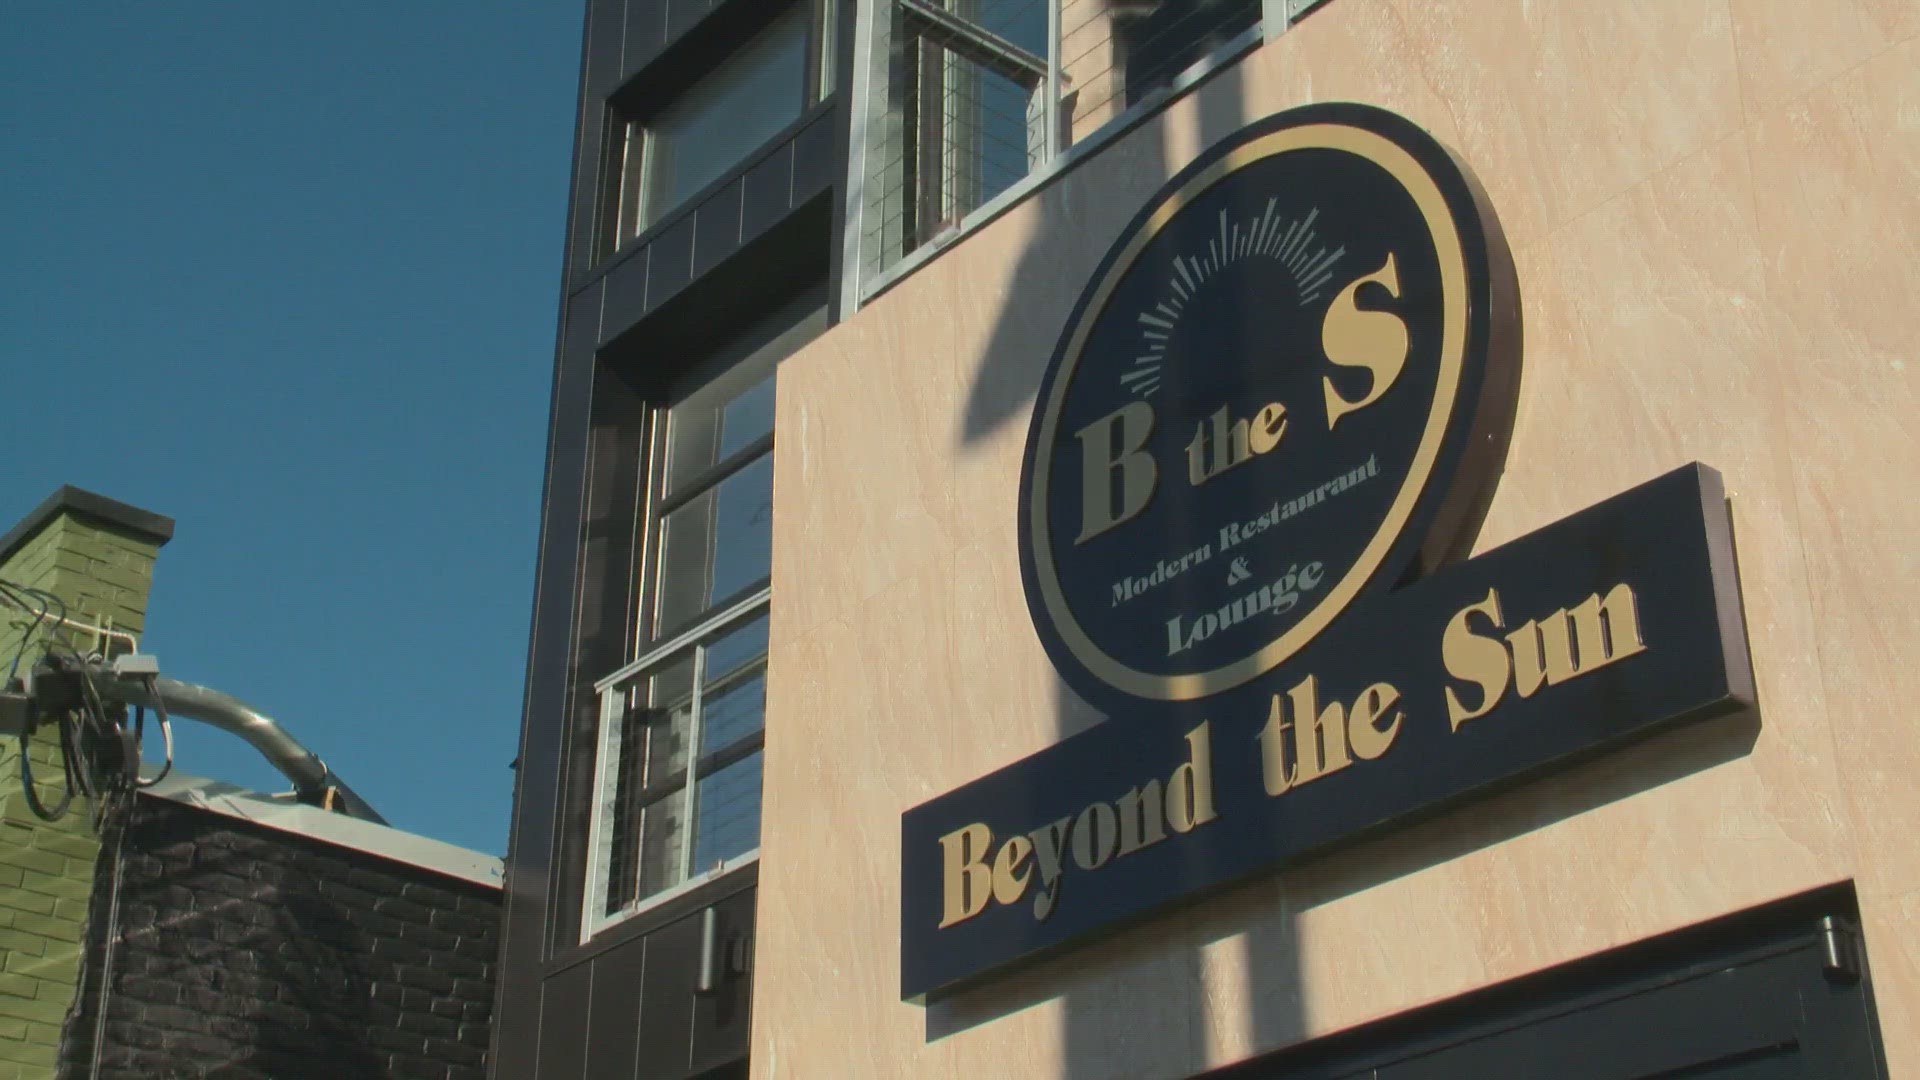 Beyond the Sun wants to lean into their lounge status with live music and cocktails.